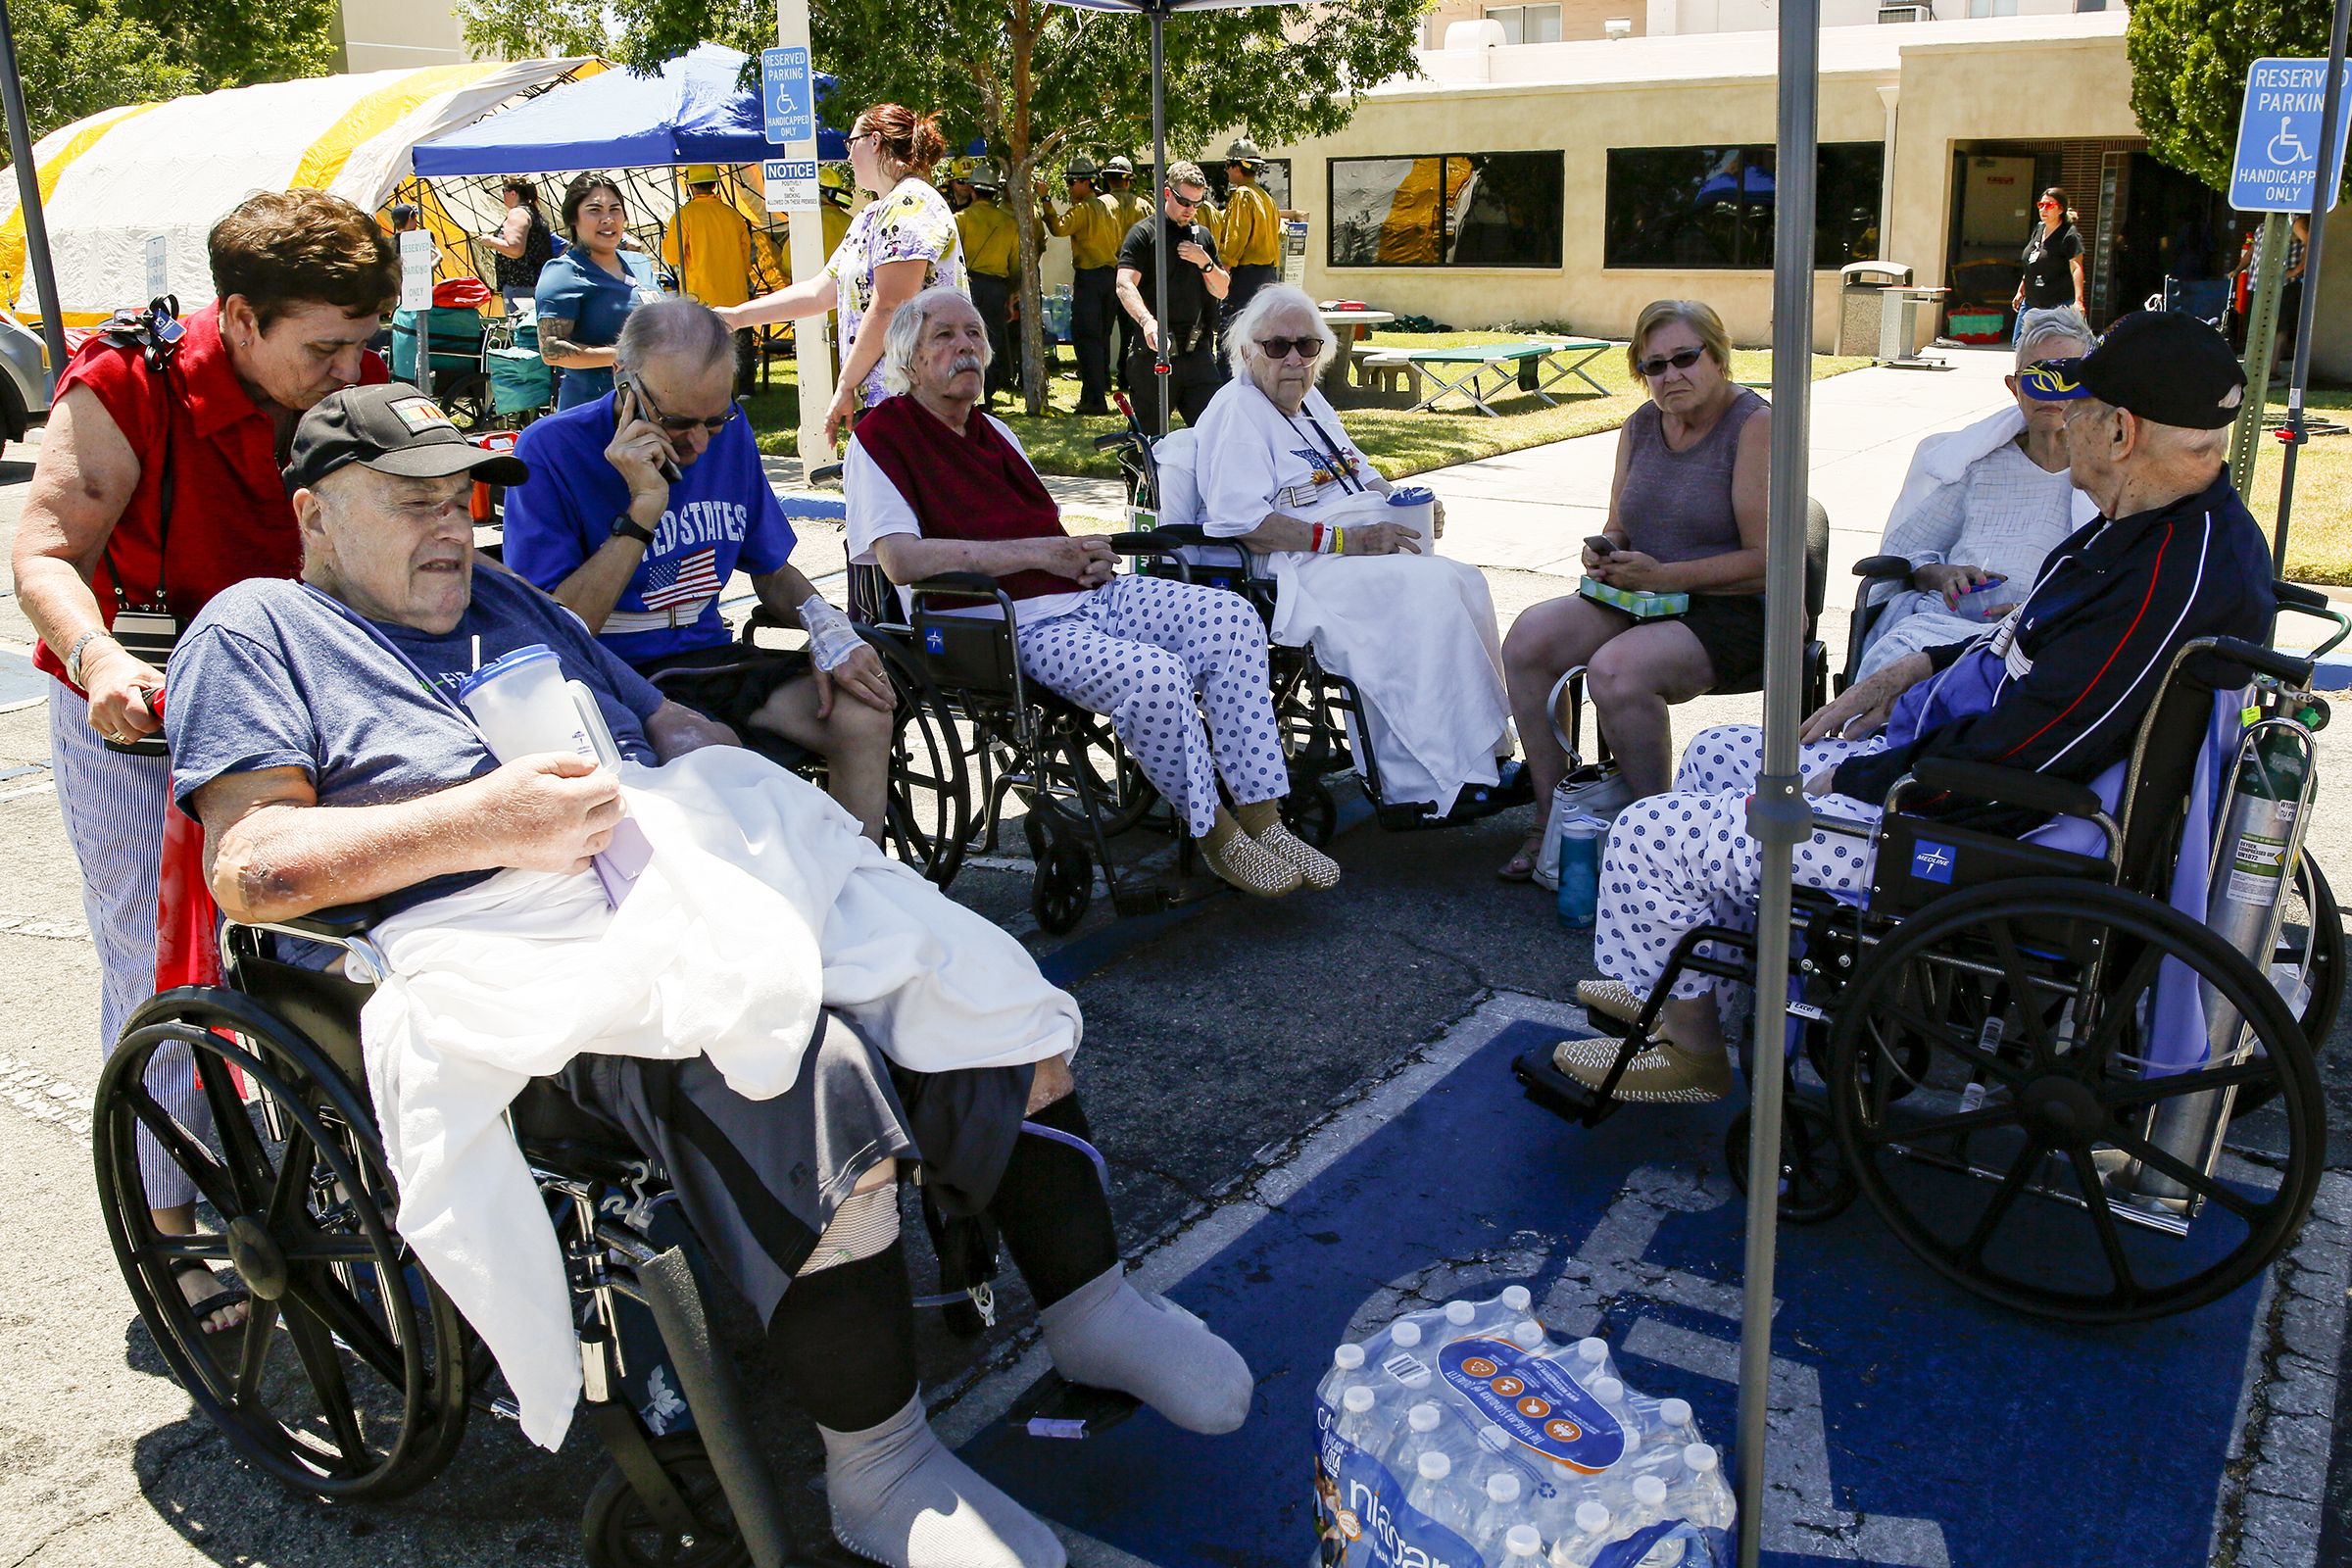 This image shows a circle of seniors in wheelchairs in a shaded area, sitting outside.